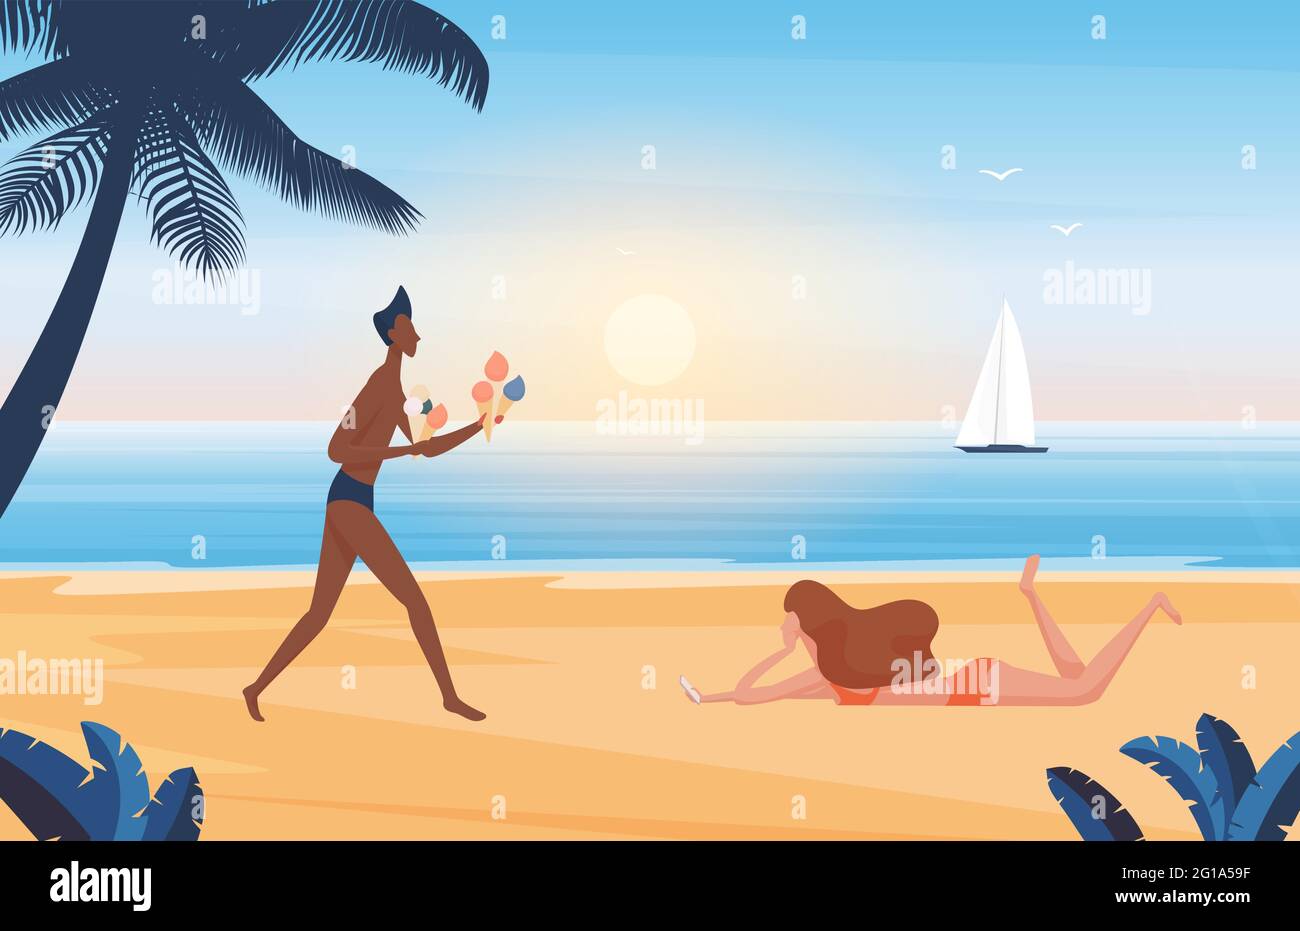 People relax on summer sea beach vacation in tropical island vector illustration cartoon young man character holding ice cream walking to girl in swimsuit bikini lying and sunbathing background stock vector image